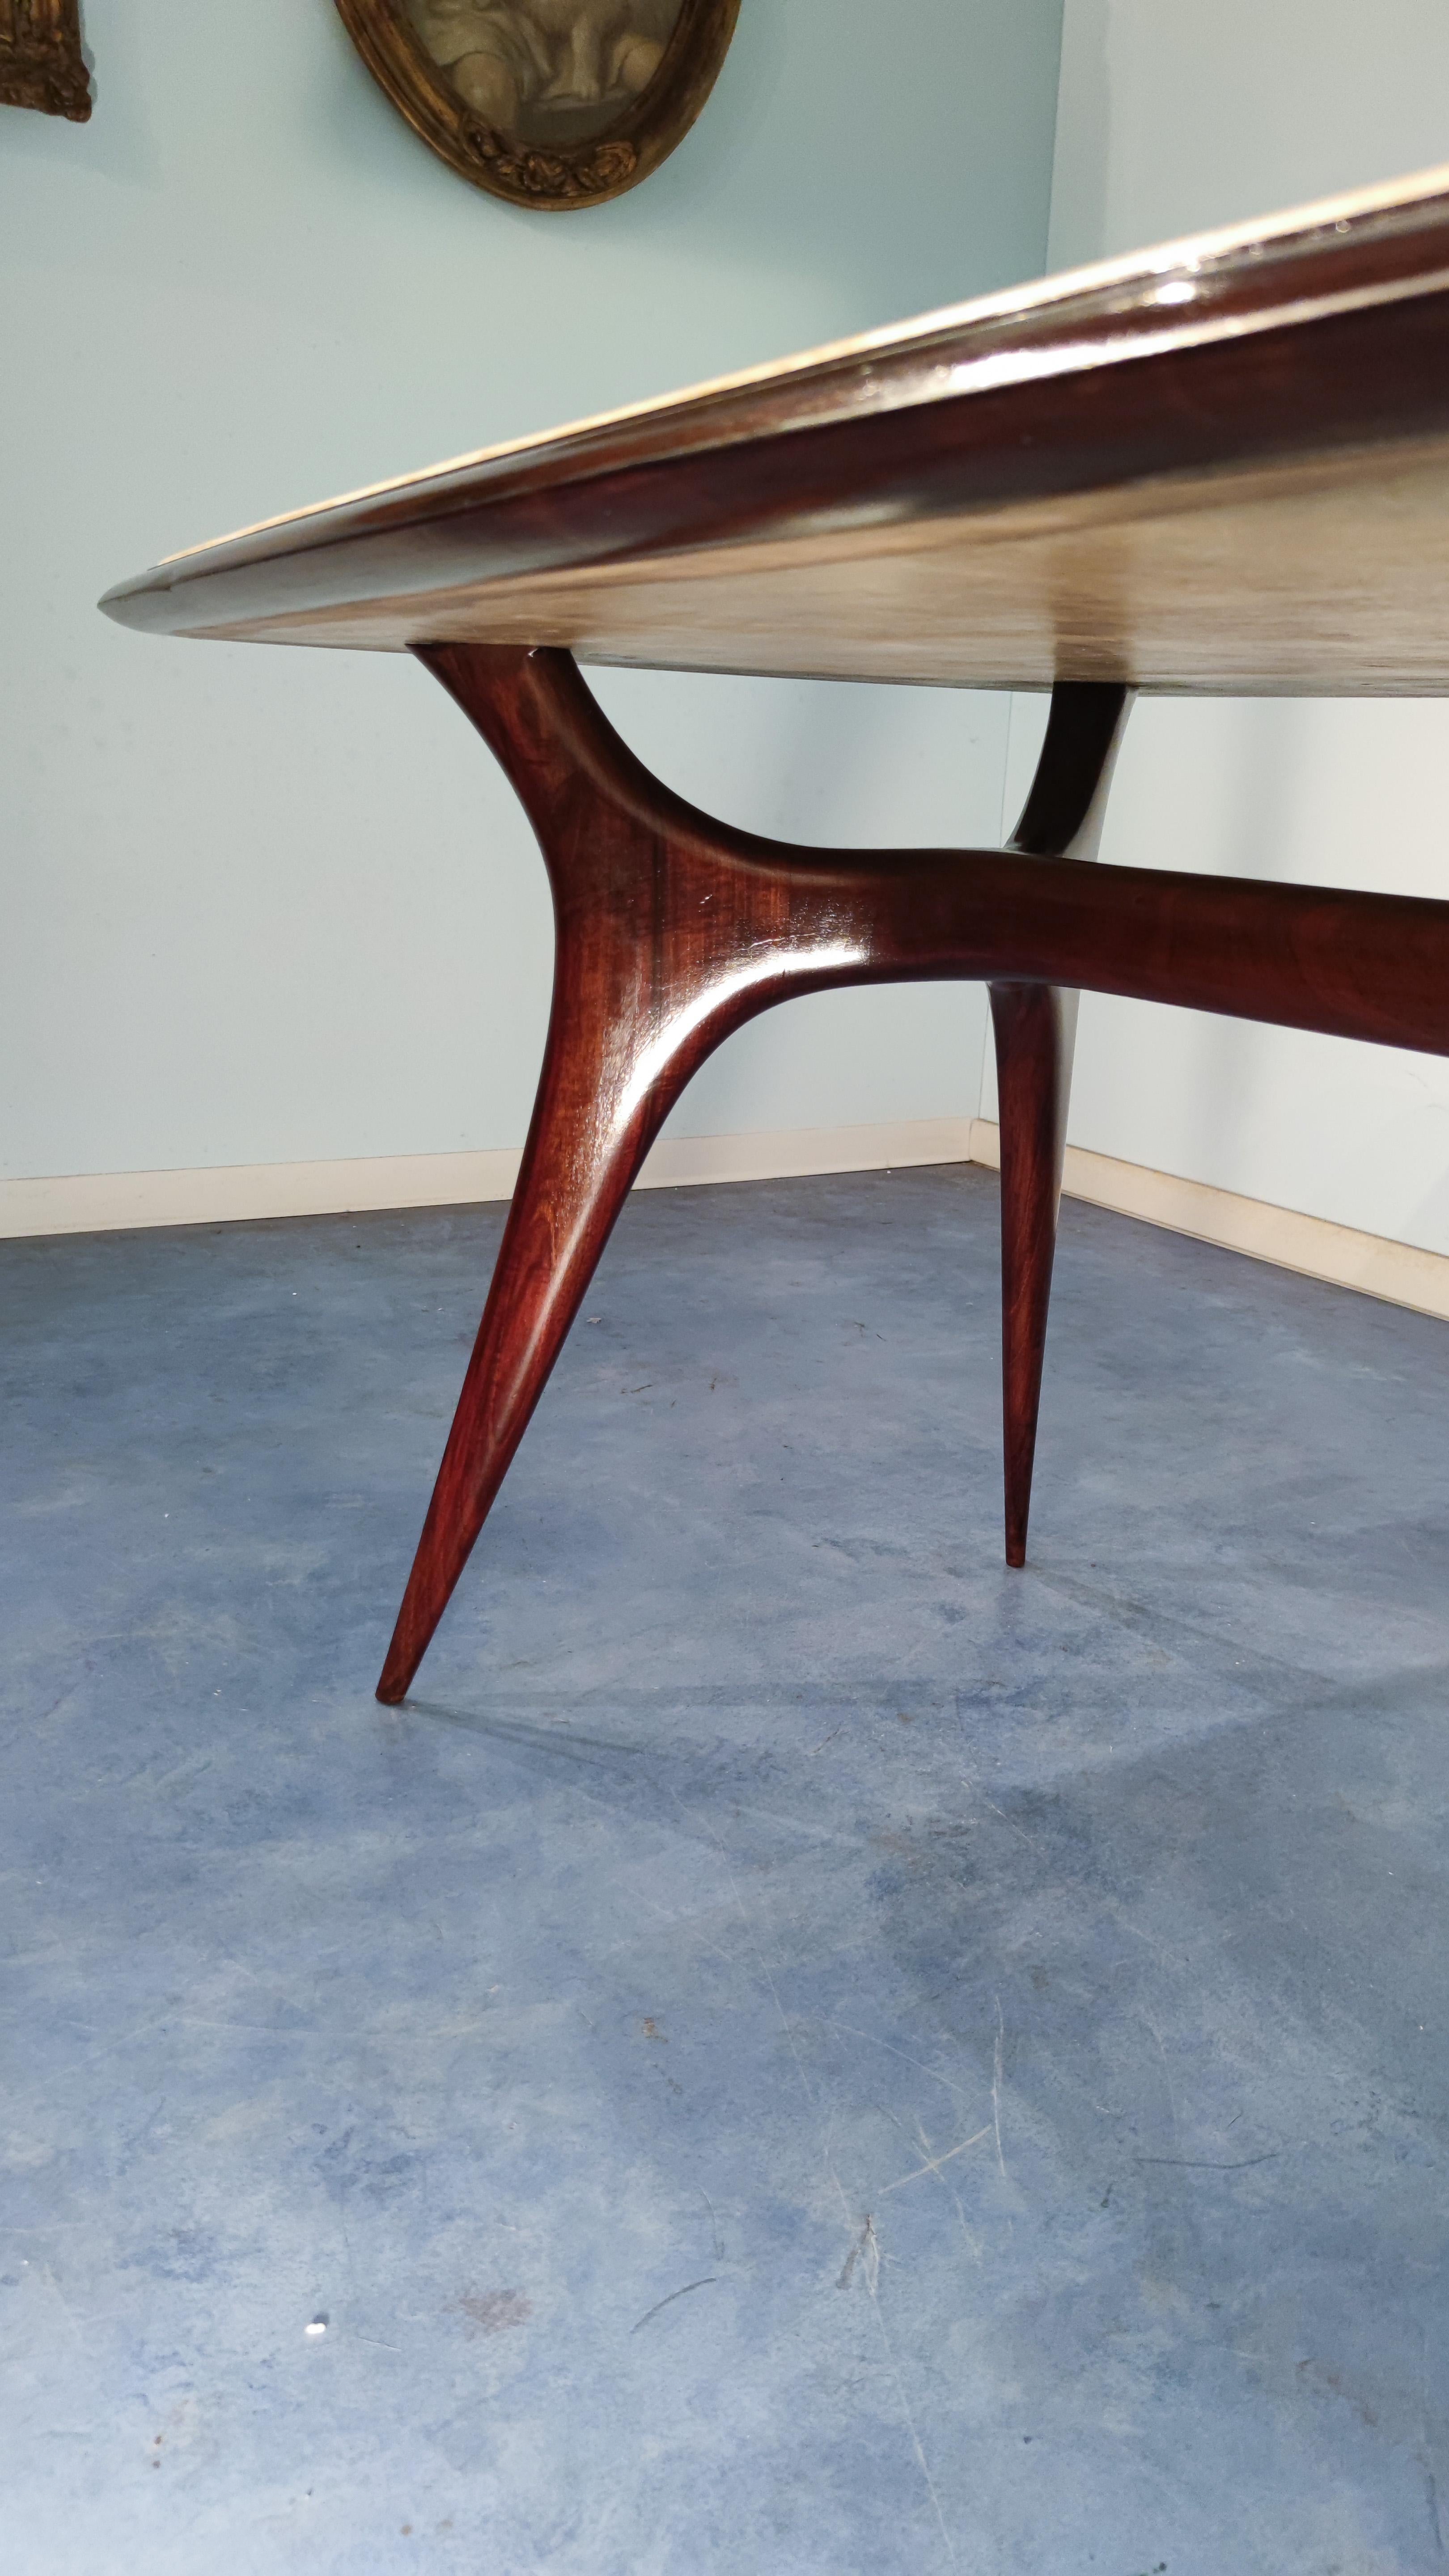 Italian Mid-Century Parchment Dining Table Attributed to Guglielmo Ulrich, 1950s For Sale 9